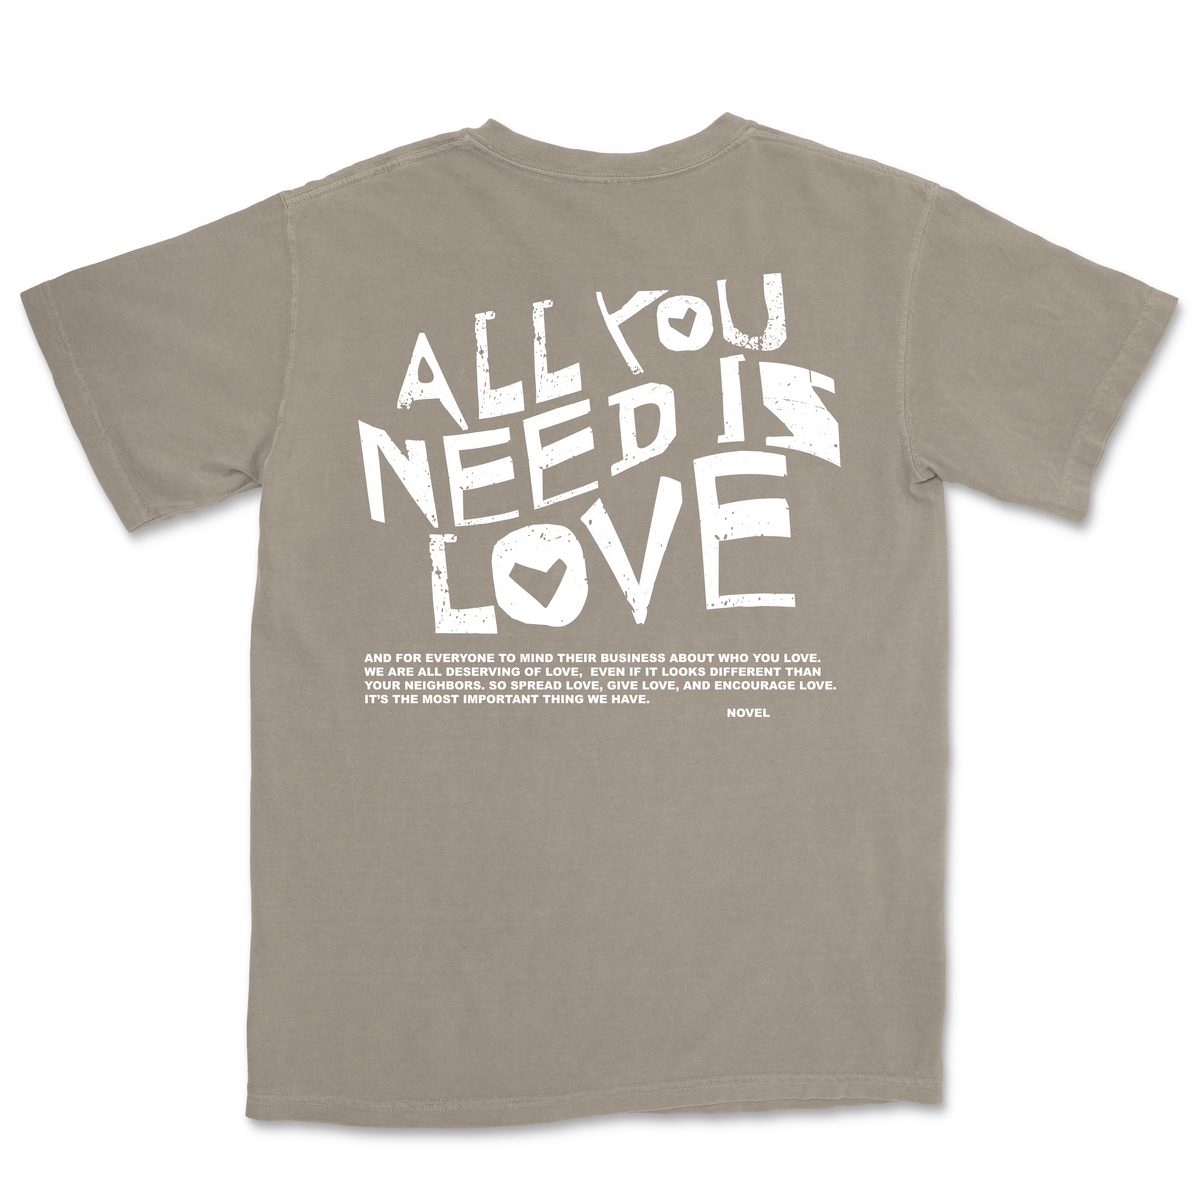 ALL YOU NEED IS LOVE (Tee) - Sandstone